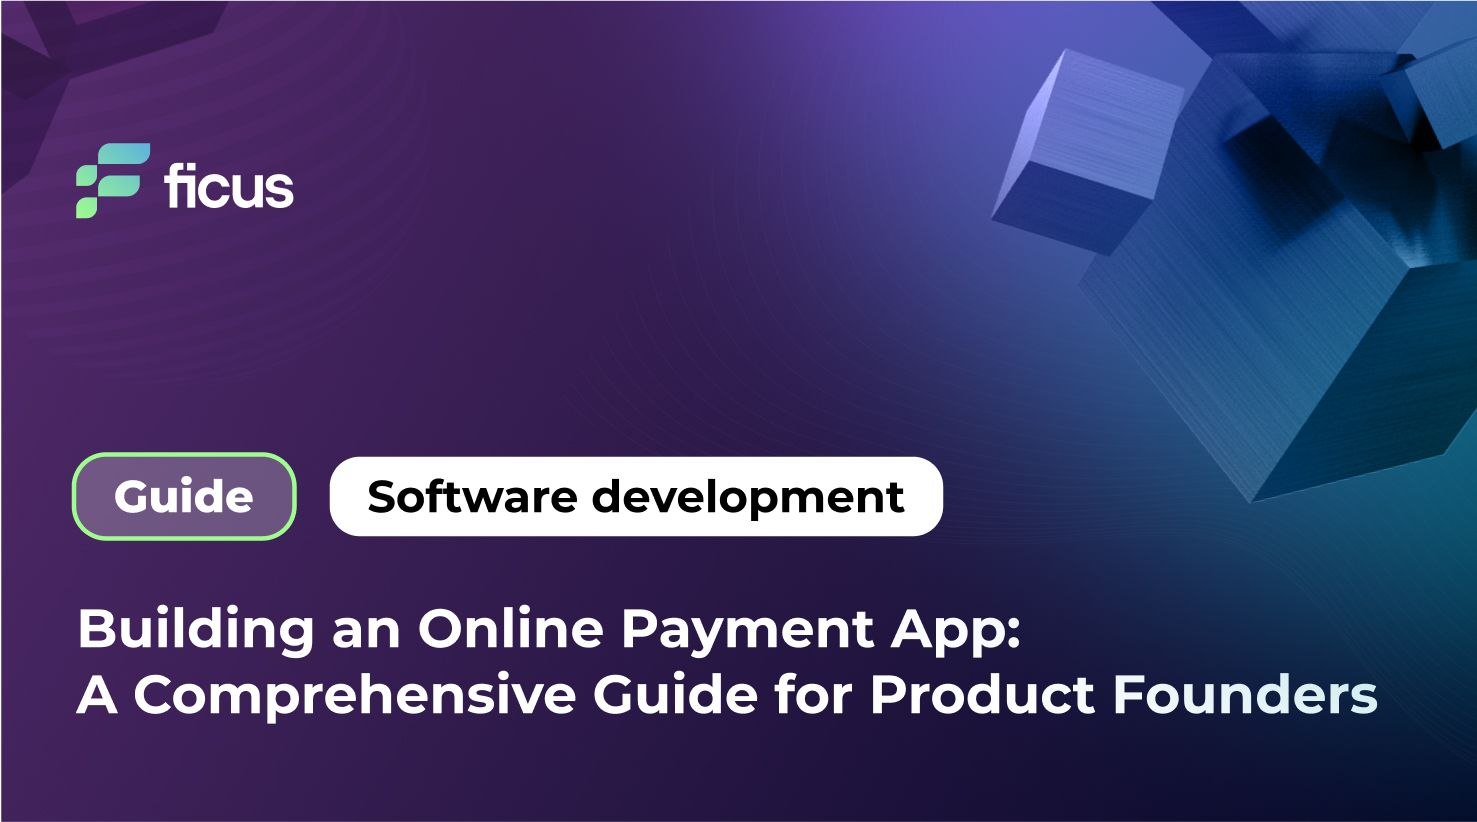 Building an Online Payment App: A Comprehensive Guide for Product Founders